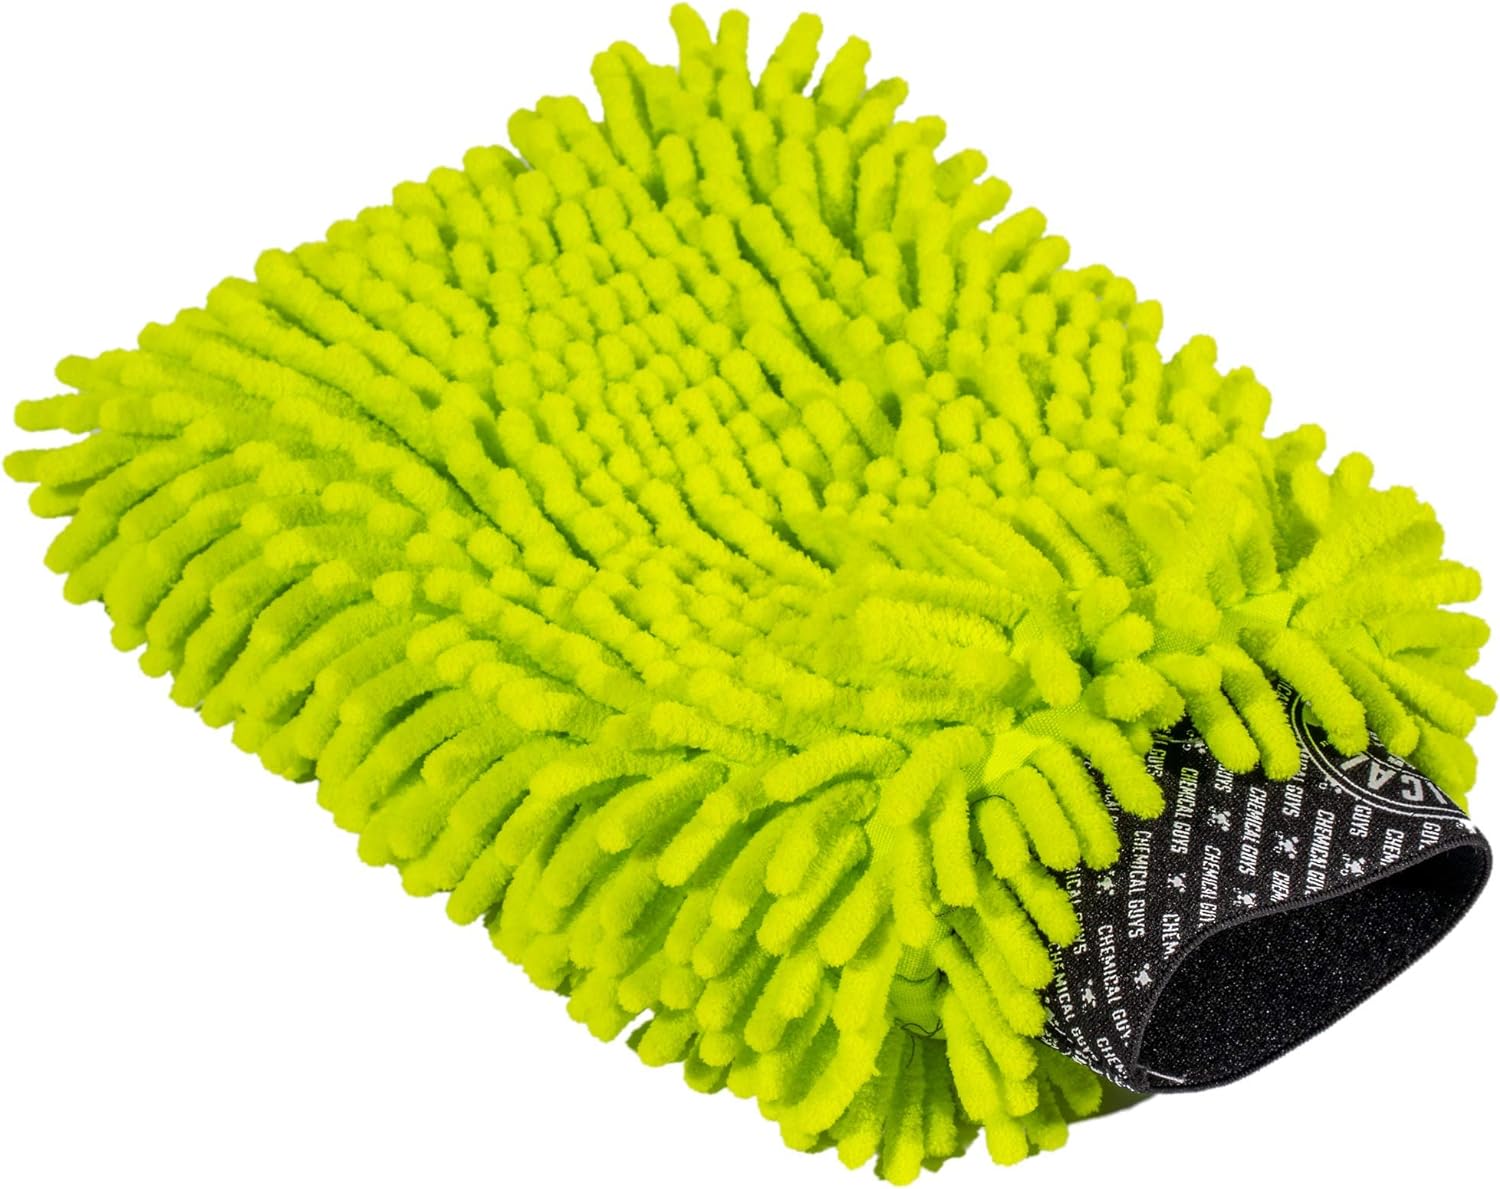 Microfibre Car Beauty Kit Cleaning Glove Wash Mit Cloth Brush Washing MY^m^ 